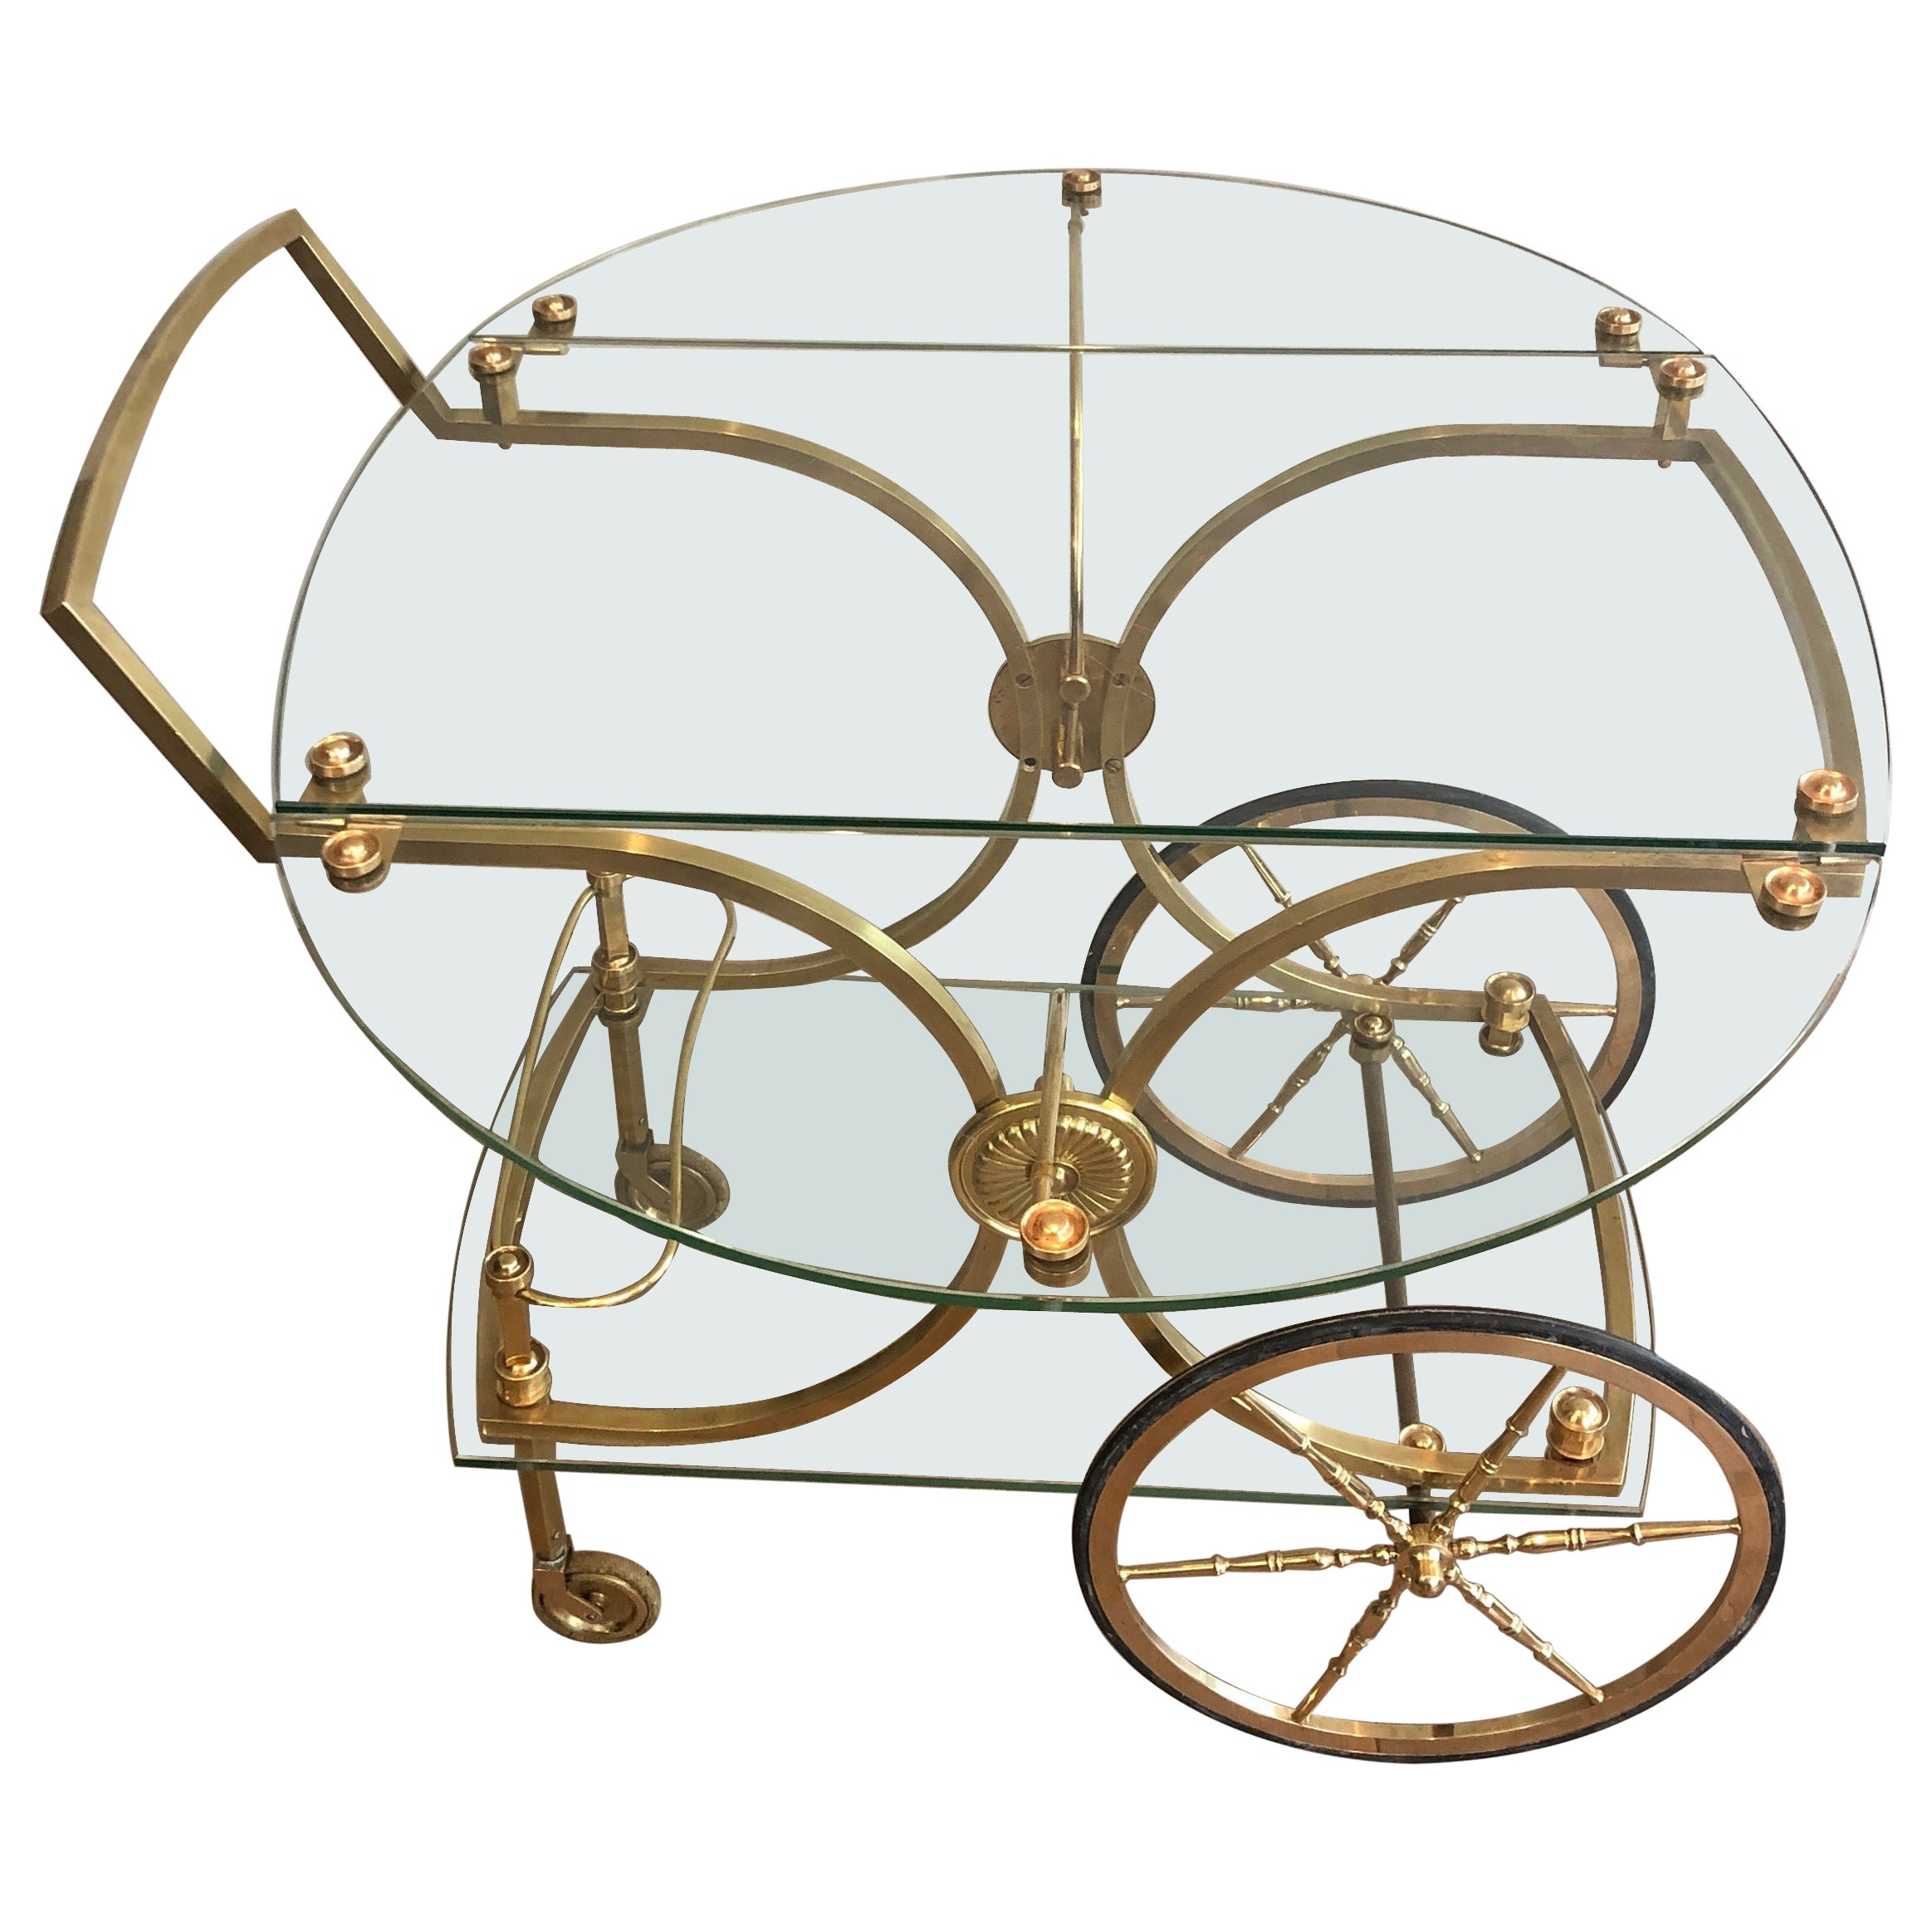 Rare Neoclassical Style Brass and Glass Drinks Trolley by Maison Bagués